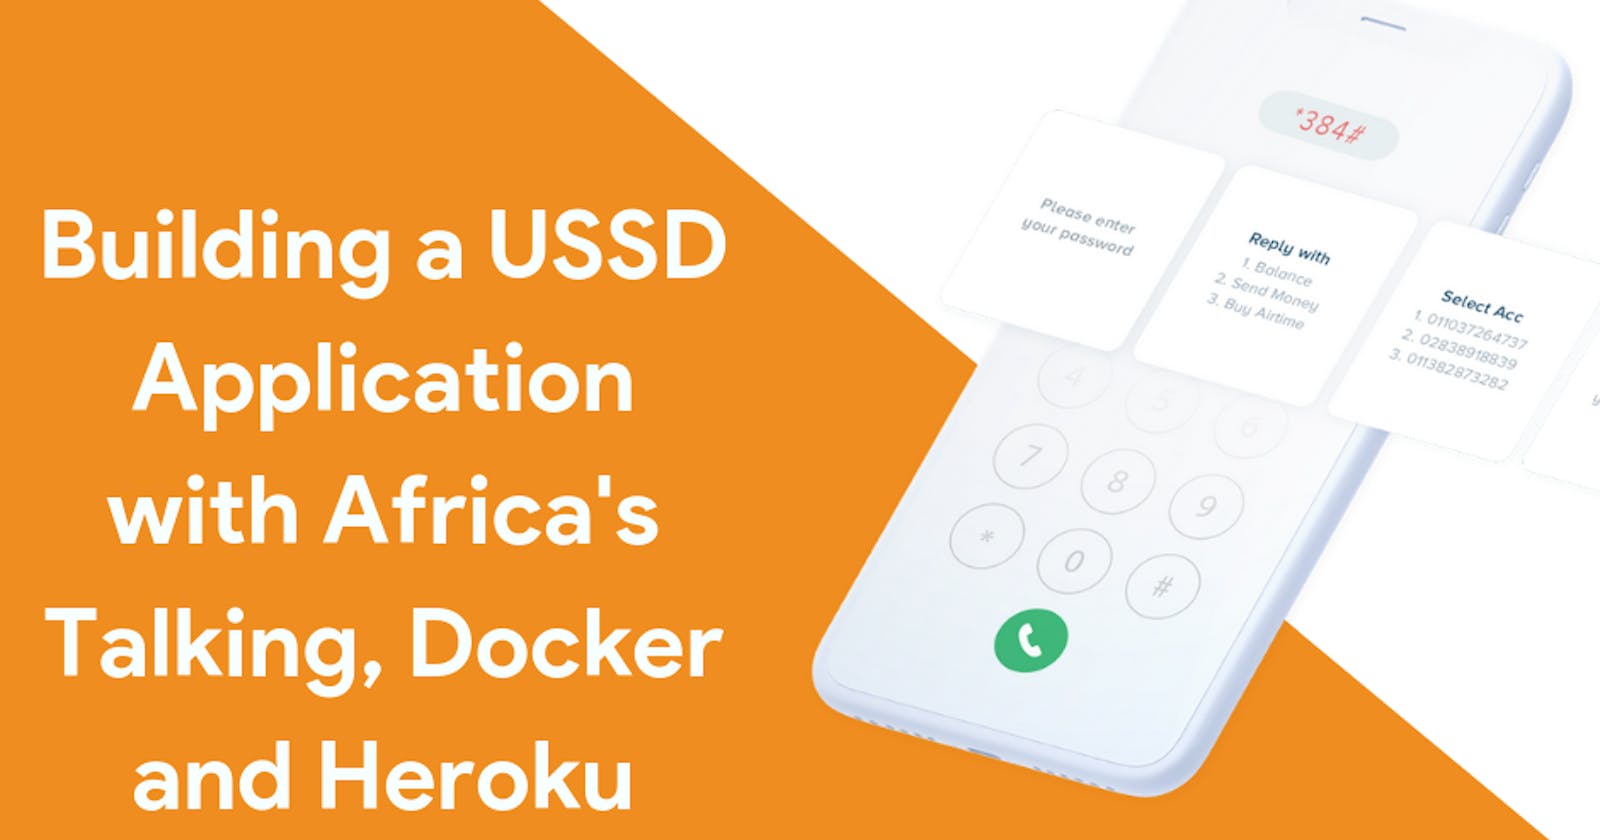 Build and deploy a USSD application with Africa's Talking, Docker and Heroku [Python] - Part 2